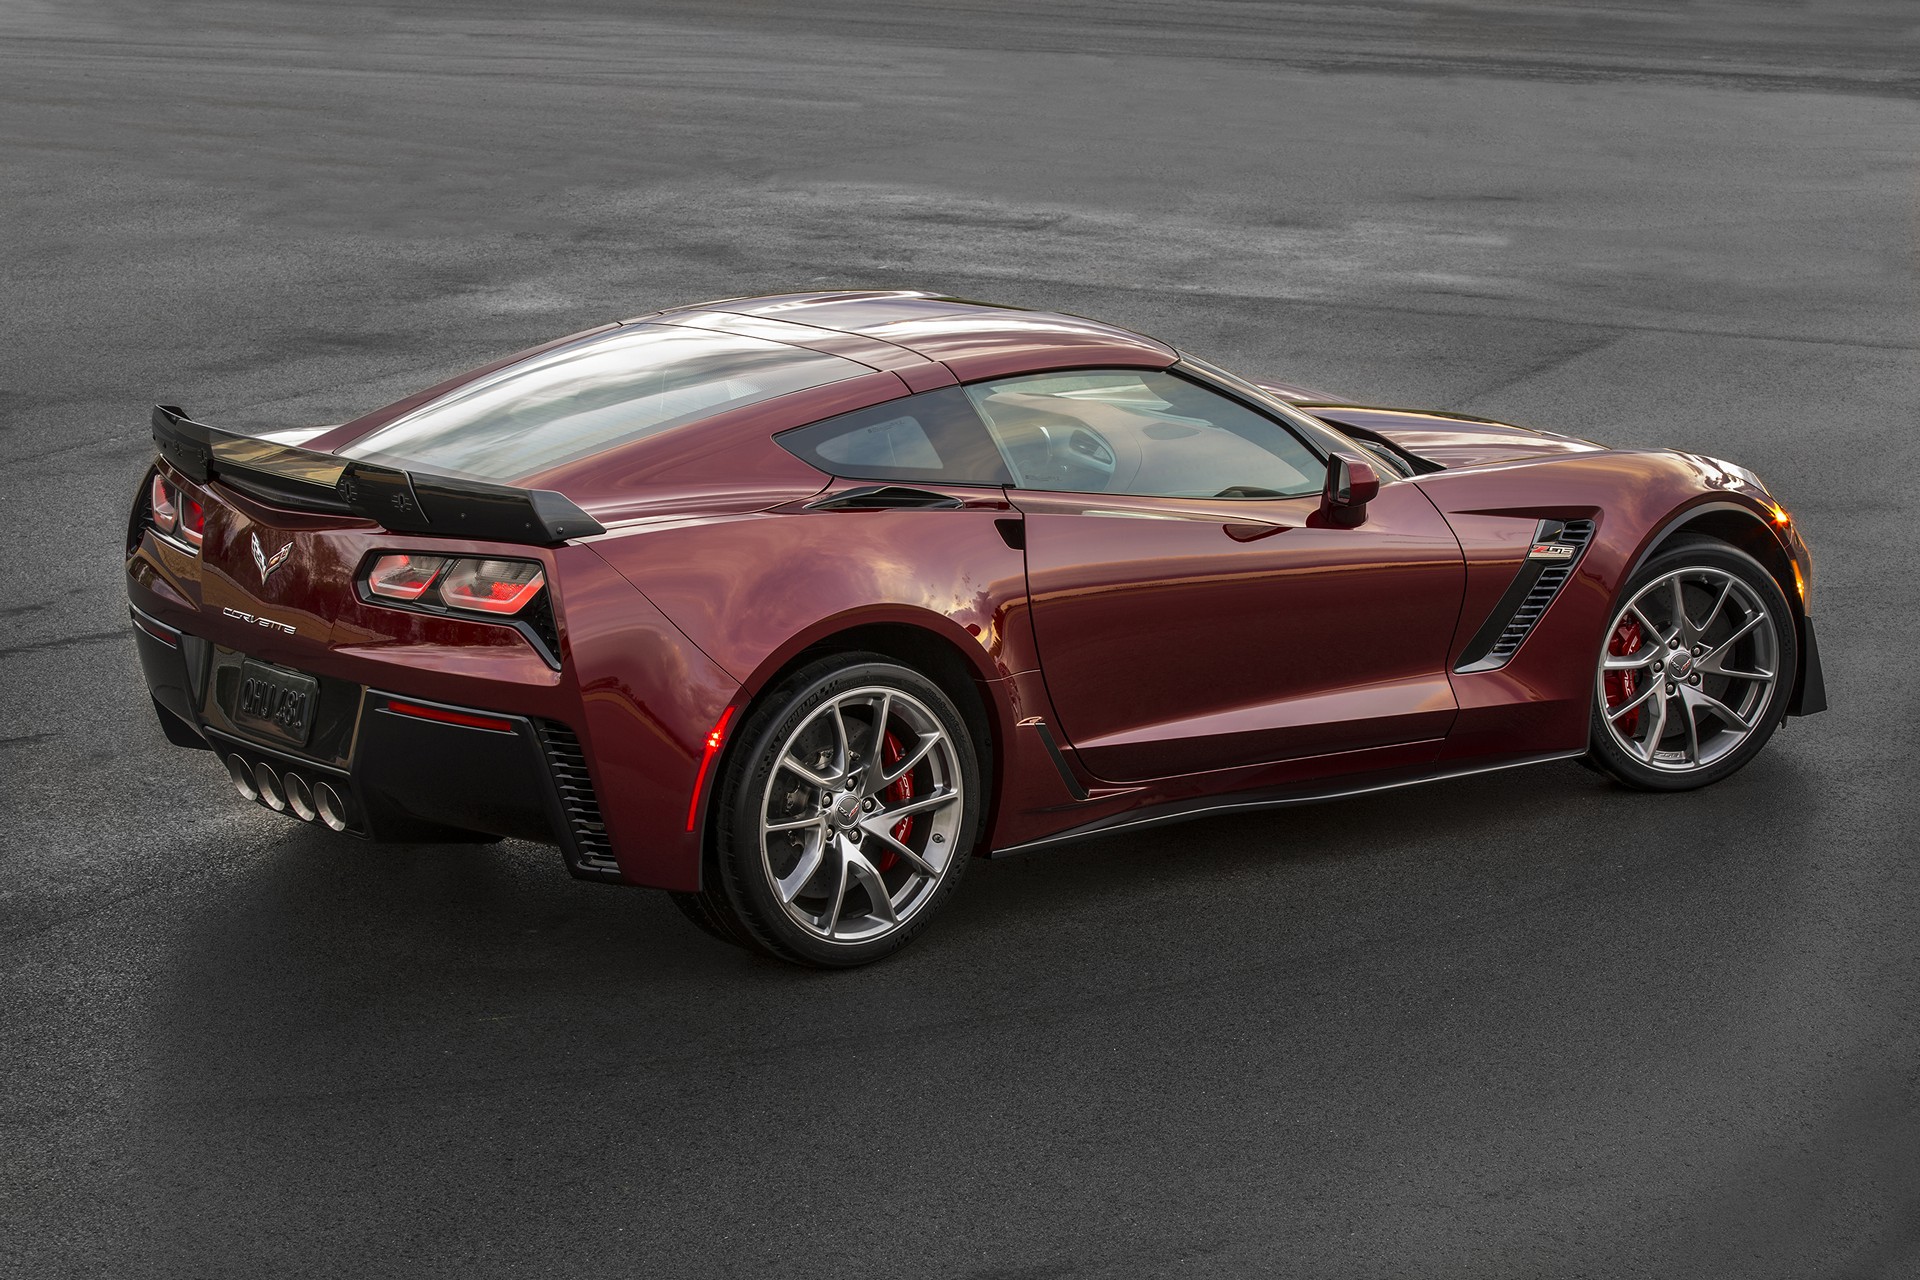 2016 Corvette Stingray and Z06 Spice Red Design Package © General Motors